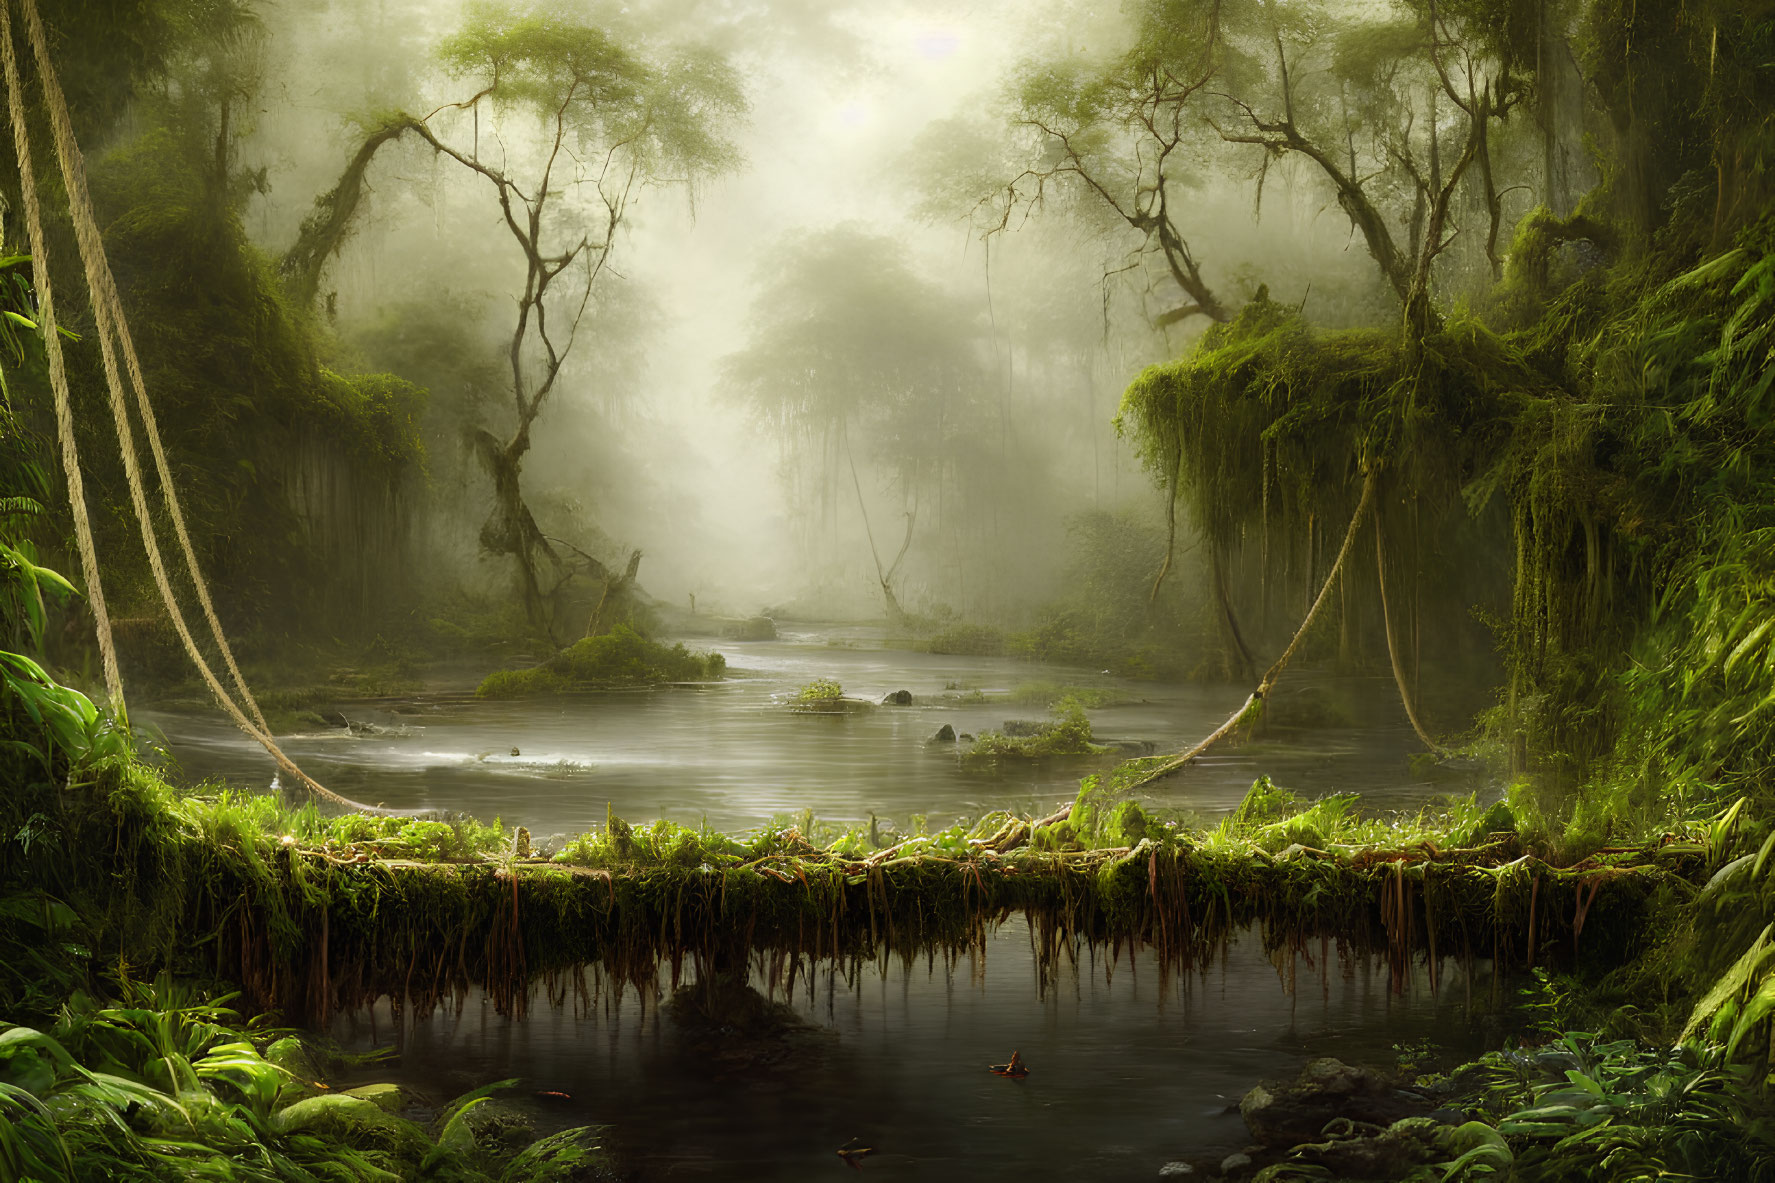 Lush Green Jungle Scene with Tranquil River